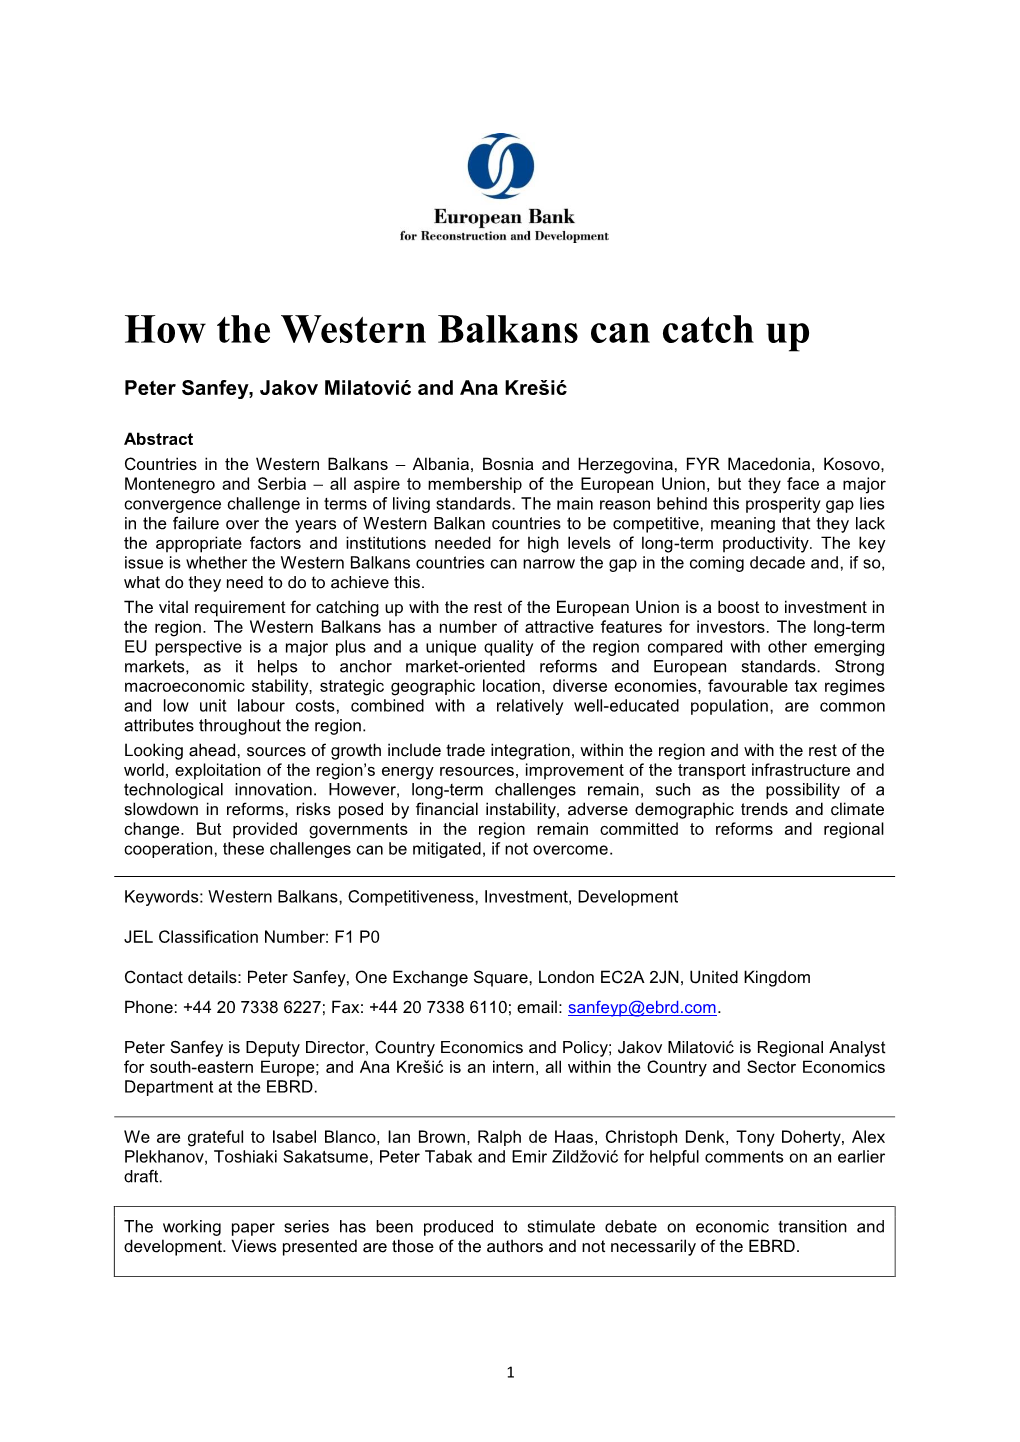 How the Western Balkans Can Catch Up